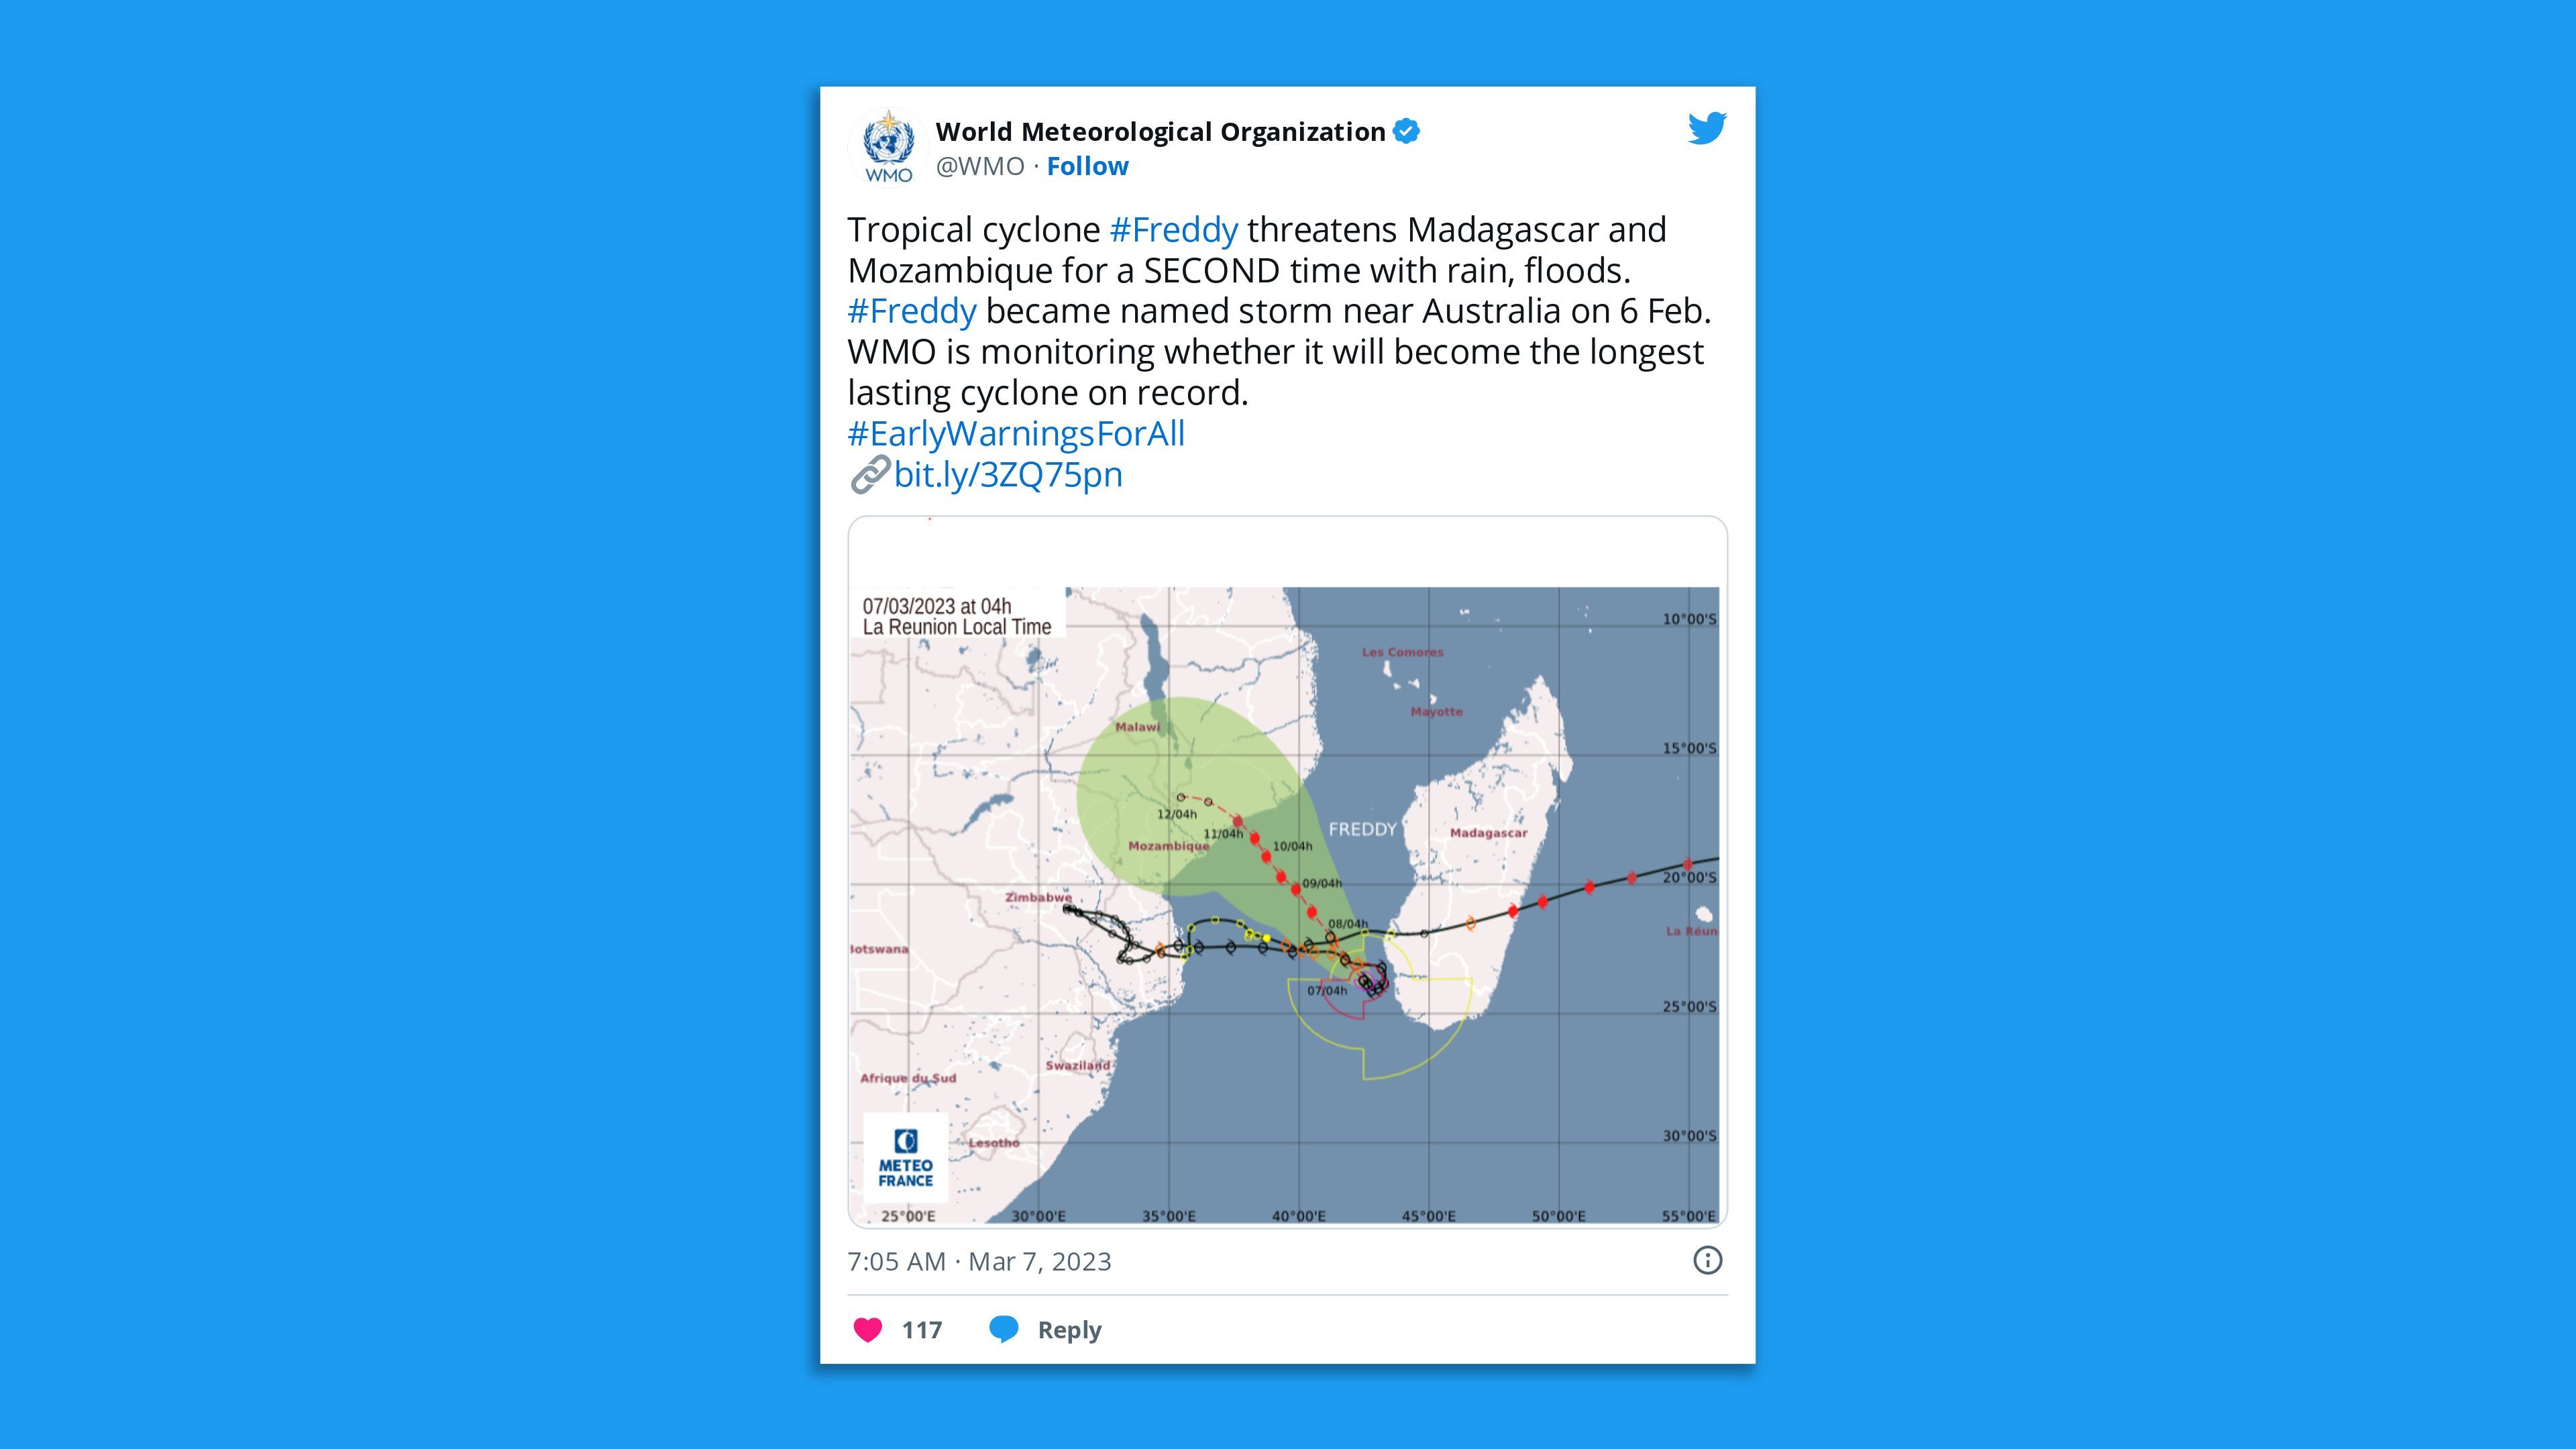 A screenshot of a WMO tweet saying, "Tropical cyclone #Freddy threatens Madagascar and Mozambique for a SECOND time with rain, floods. #Freddy became named storm near Australia on 6 Feb. WMO is monitoring whether it will become the longest lasting cyclone on record."